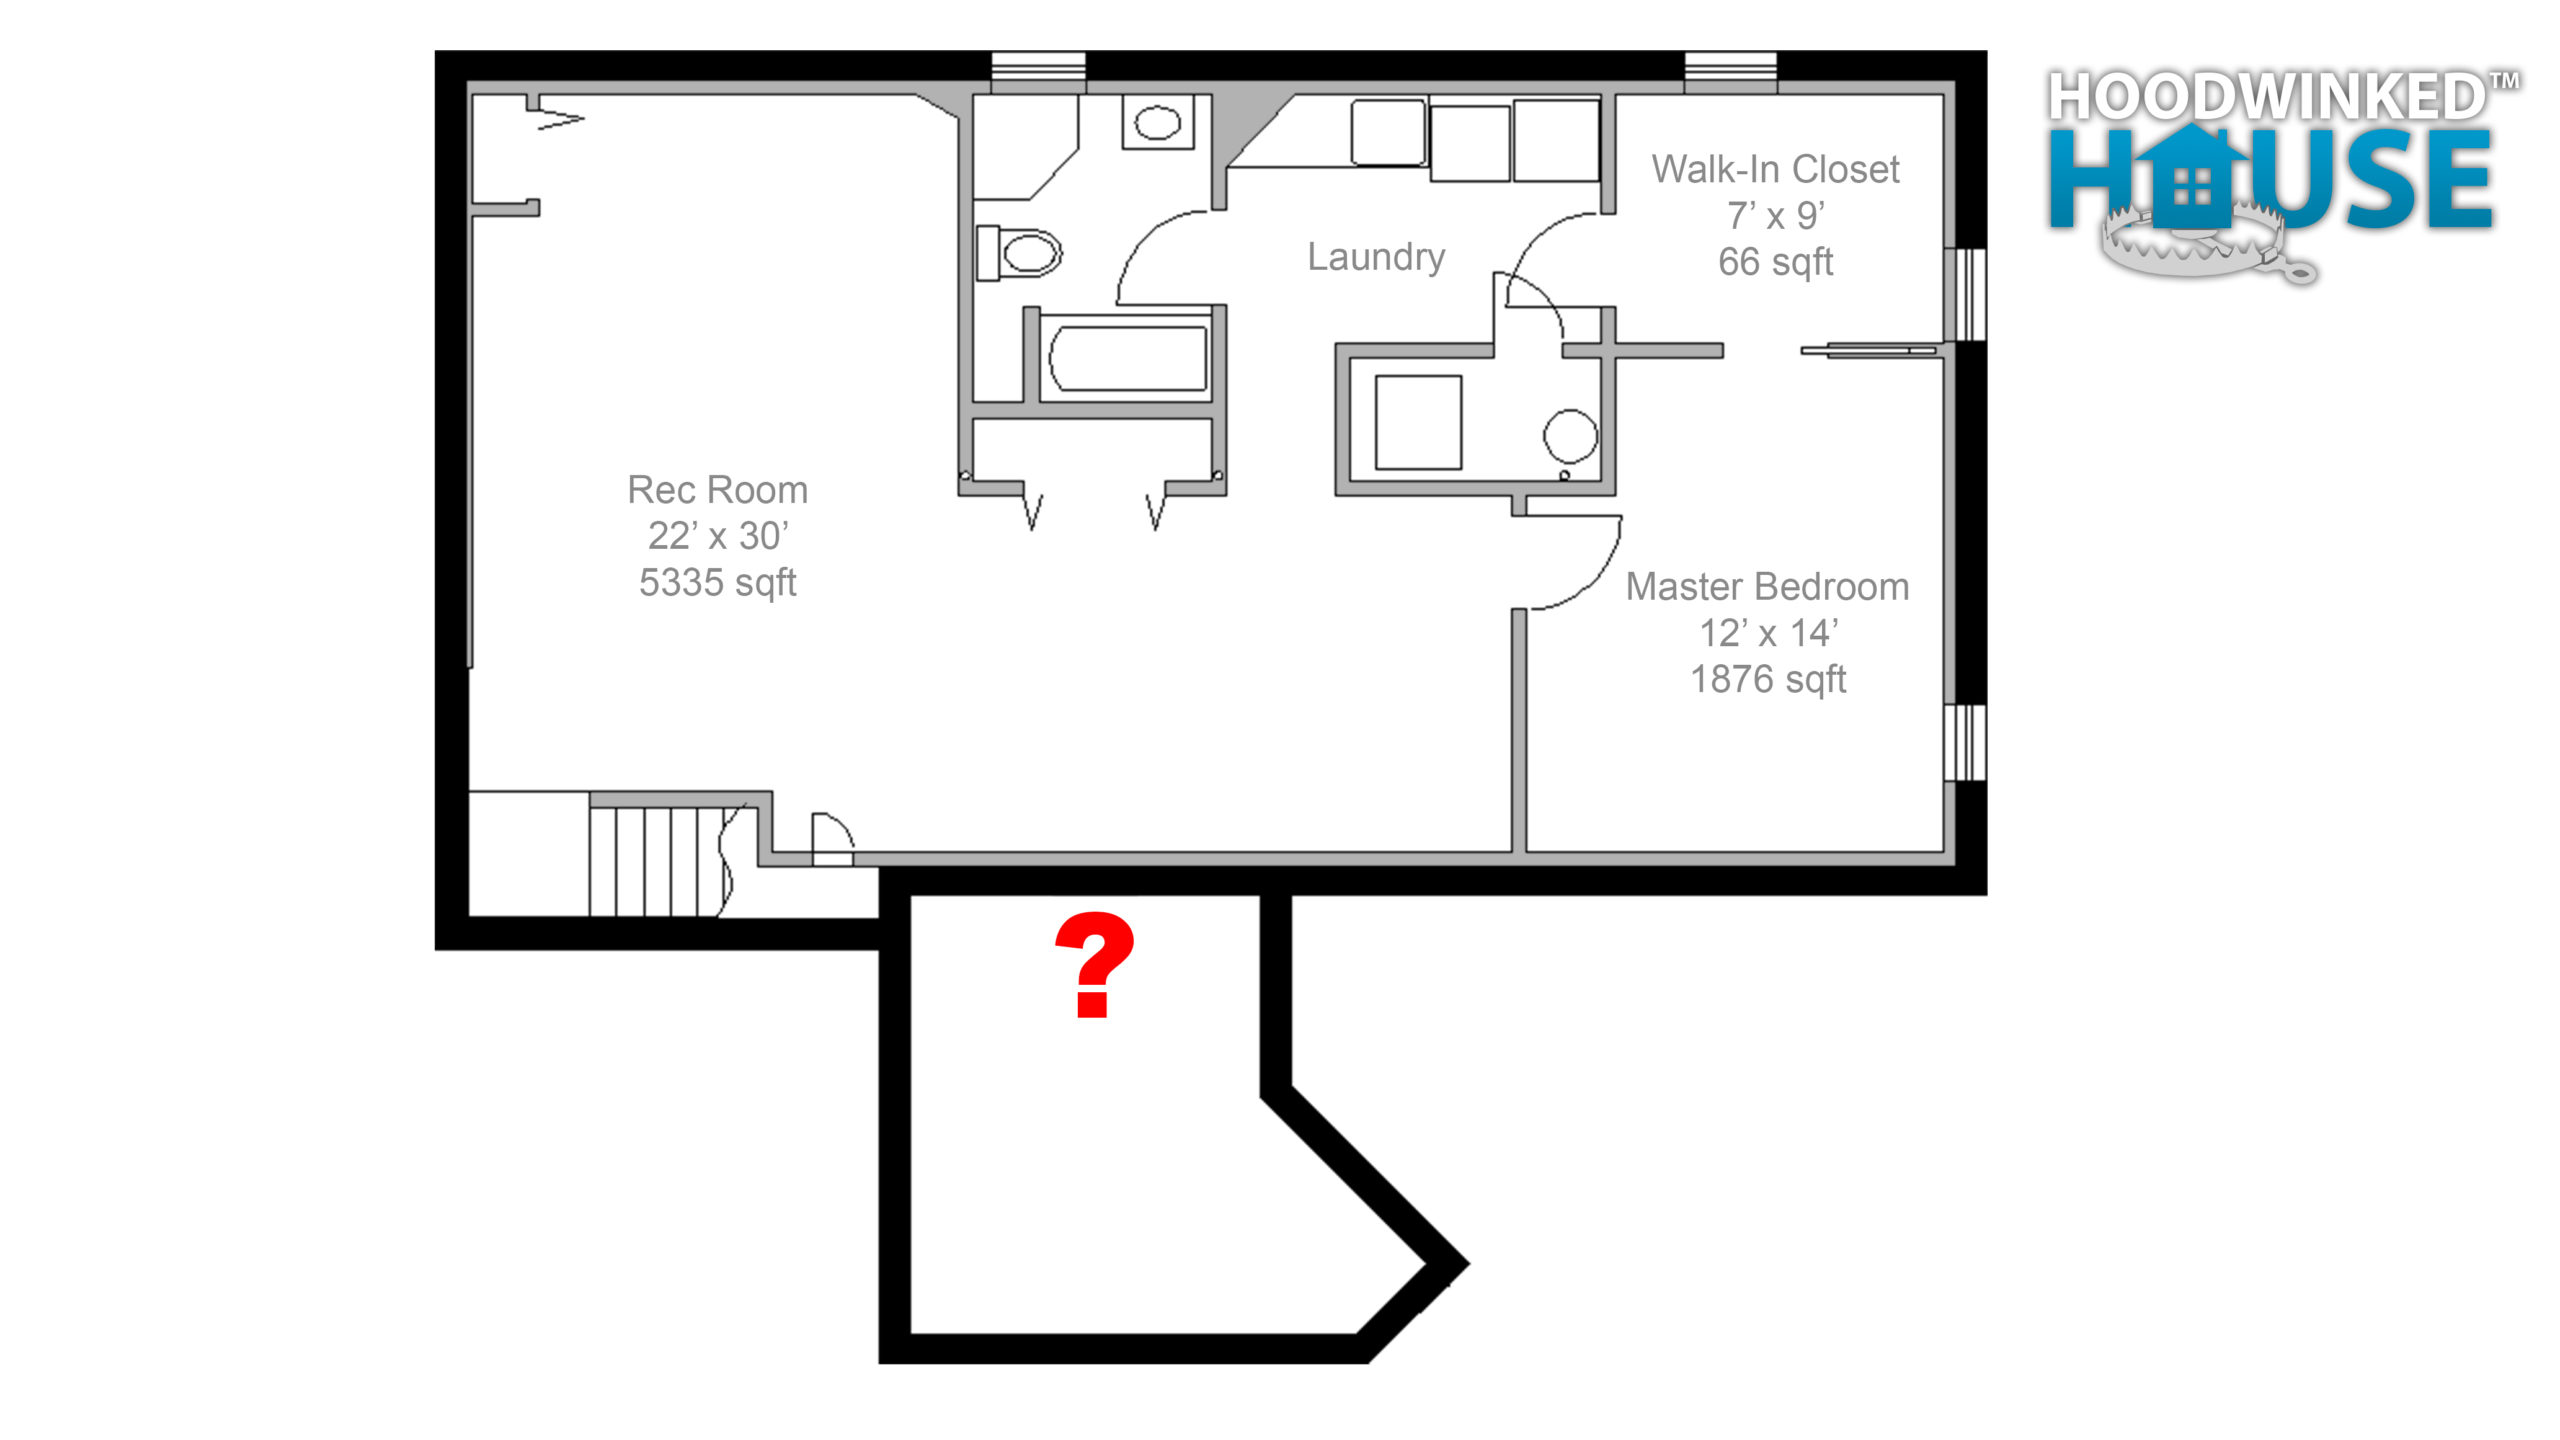 Floorplan showing a crawlspace with no visible access.